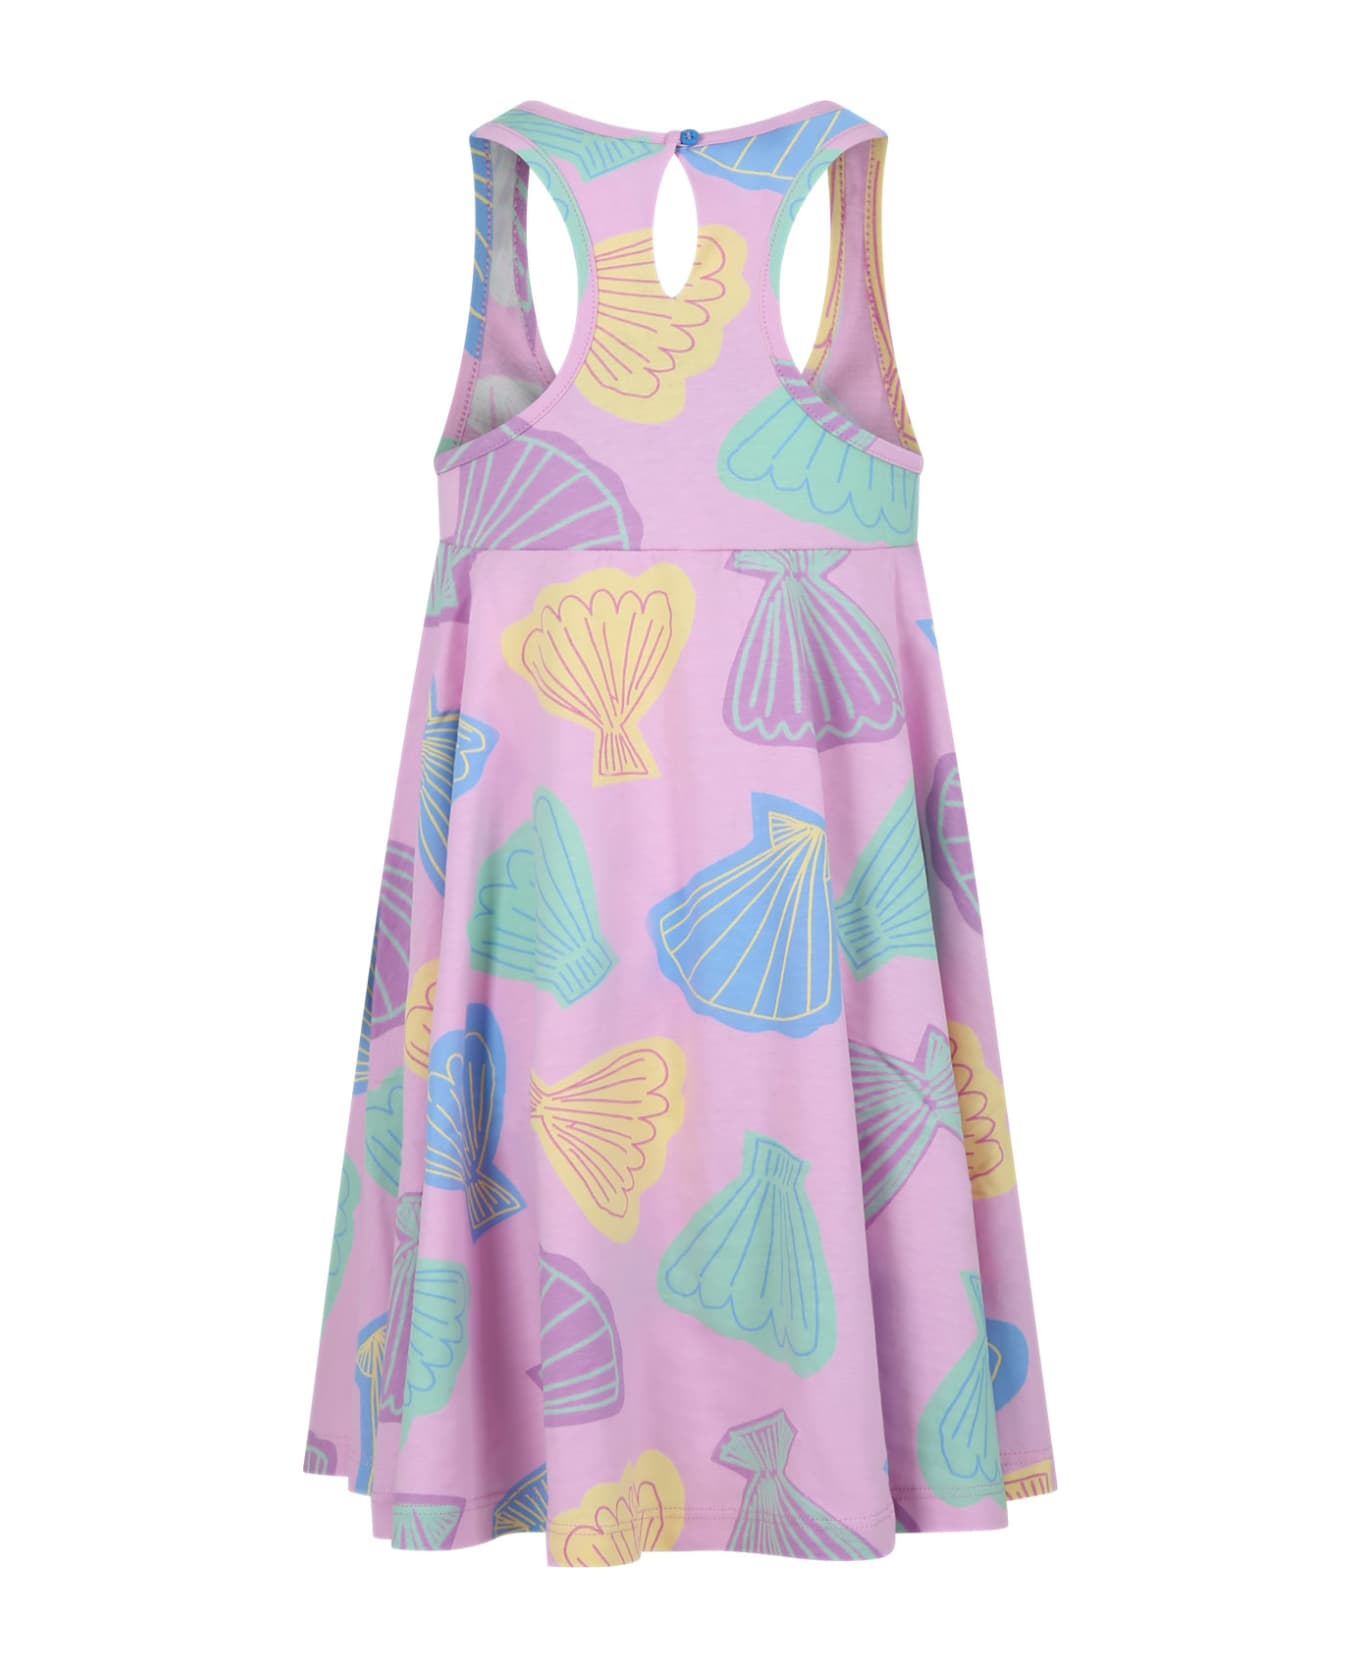 Stella McCartney Kids Pink Dress For Girl With All-over Multicolor Print - Pink